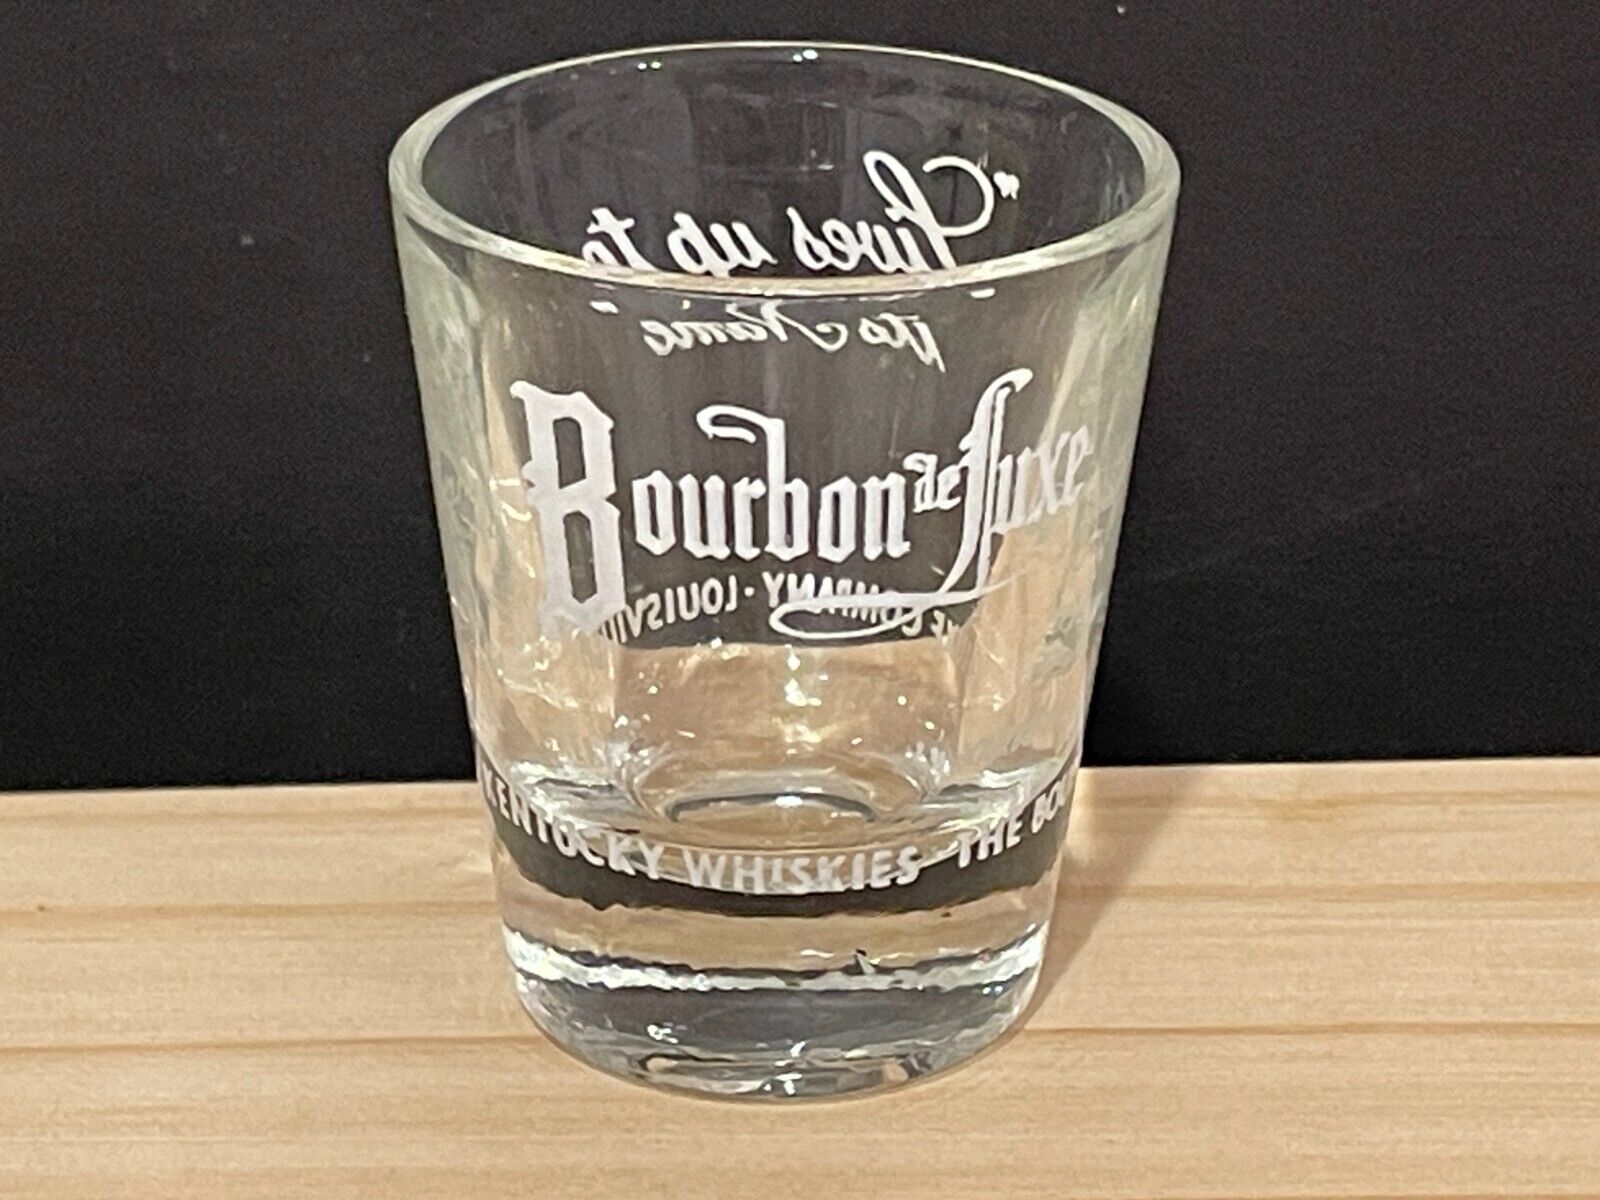 Vintage Bourbon de Luxe “Lives Up To Its Name” Bourbon Whiskey Shot Glass